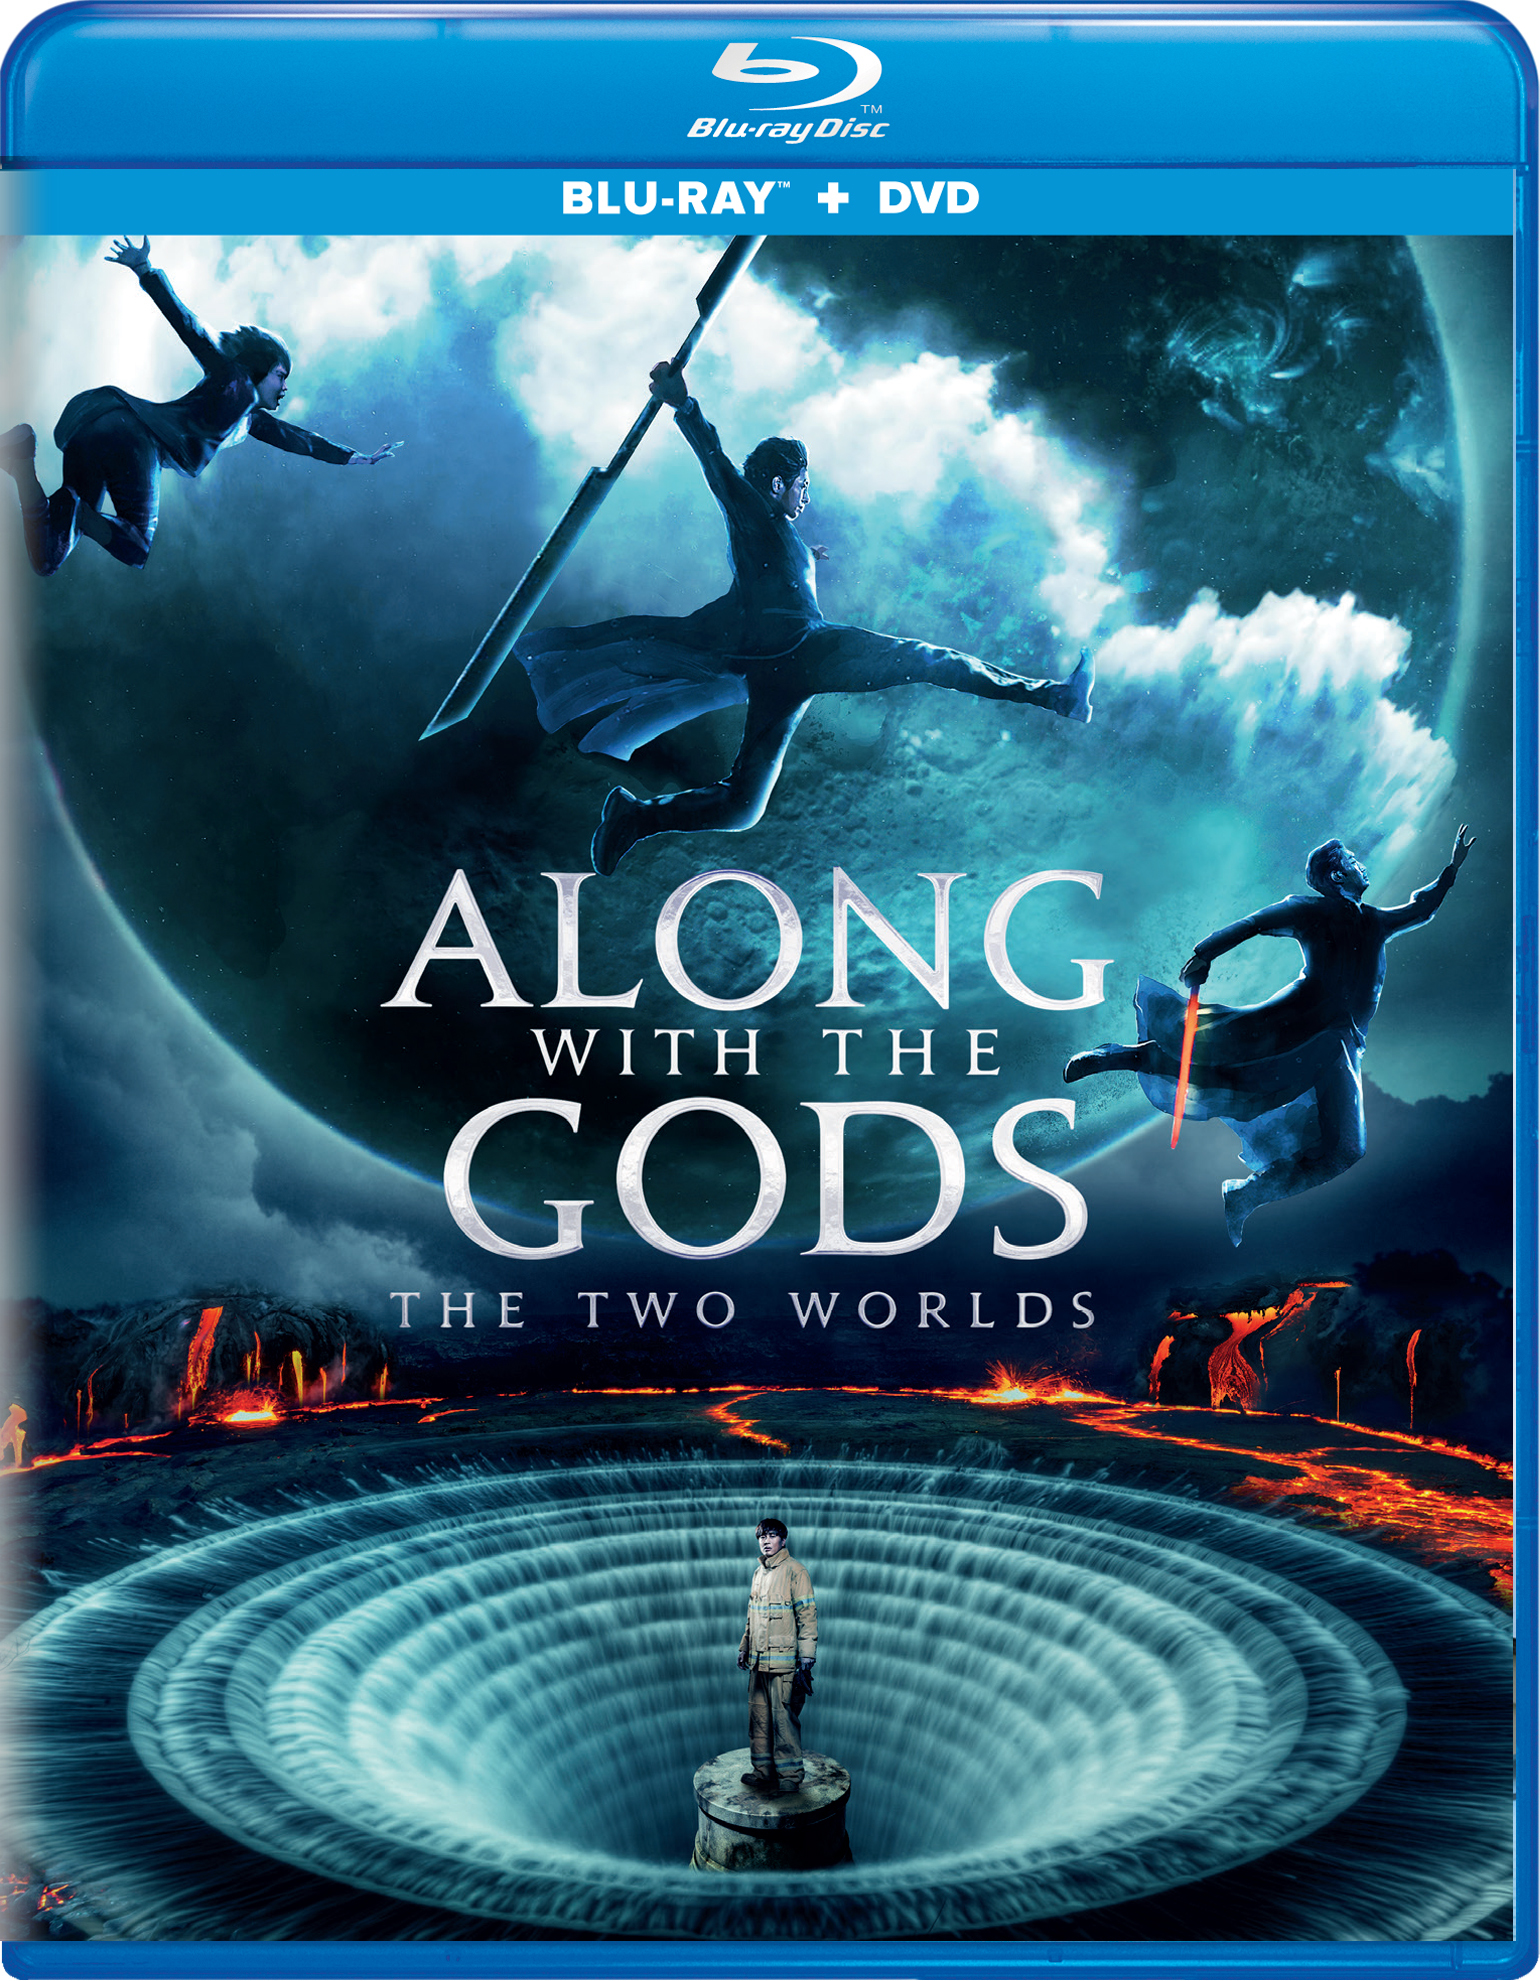 Along With The Gods - The Two Worlds (with DVD) - Blu-ray [ 2017 ]  - Foreign Movies On Blu-ray - Movies On GRUV